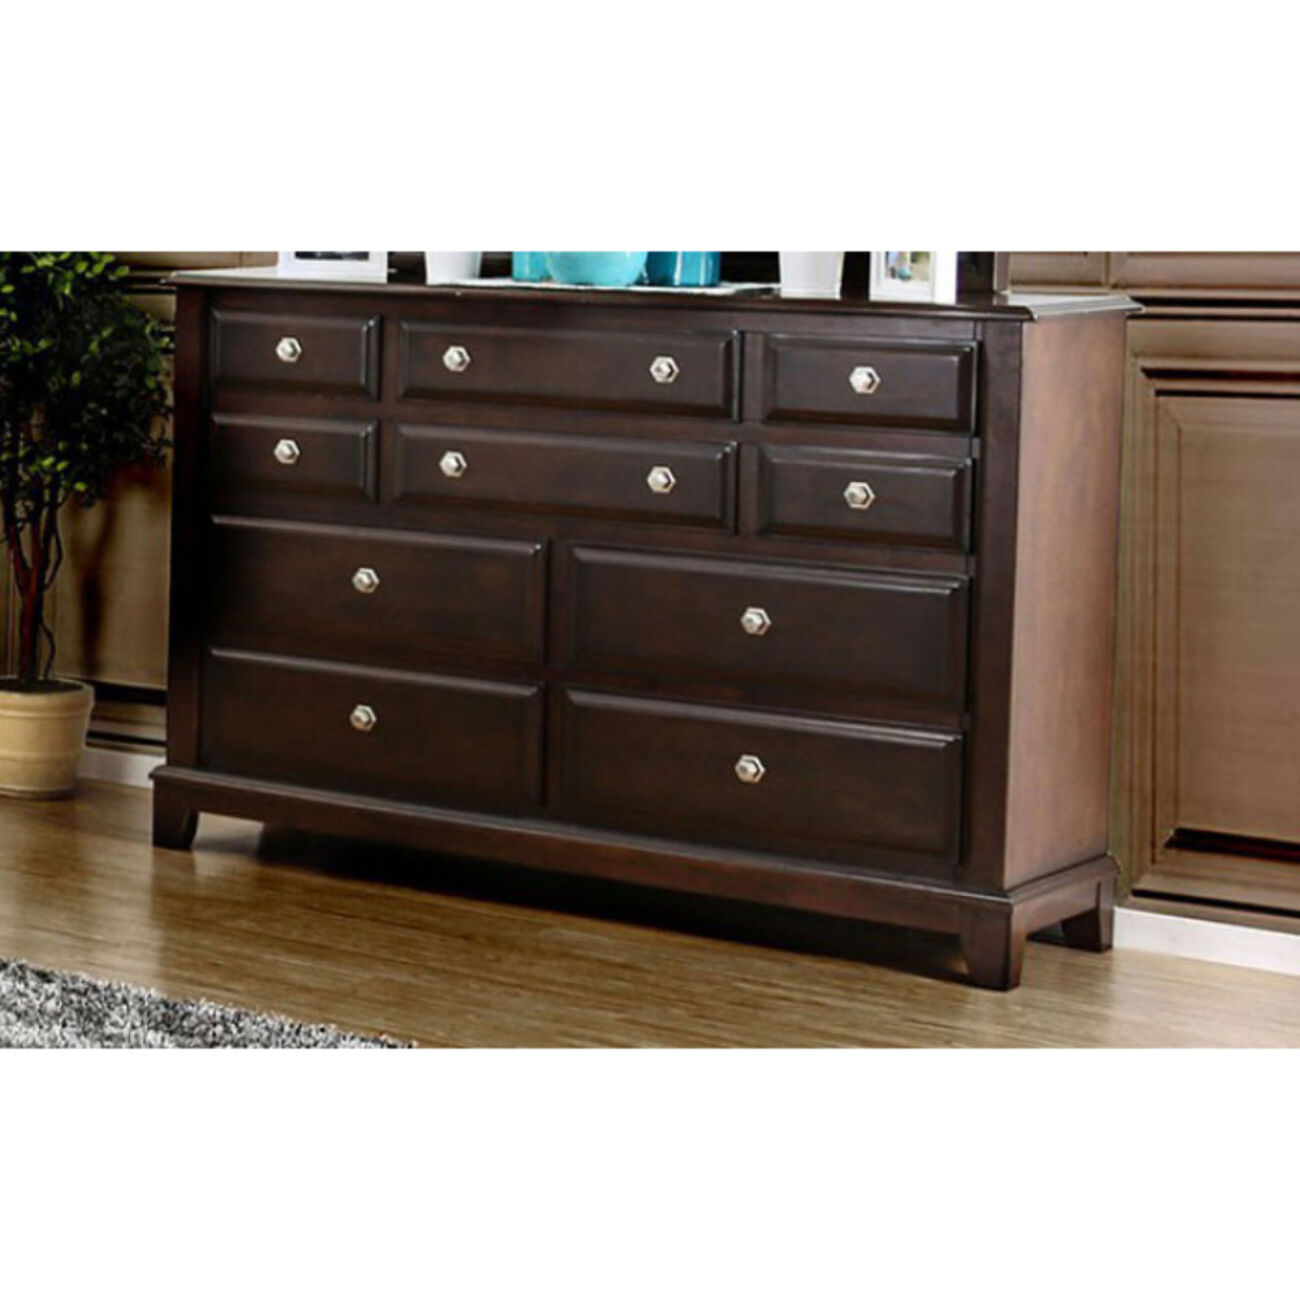 5 Drawer Wooden Chest with Wood Grain Details and Block Legs, Brown